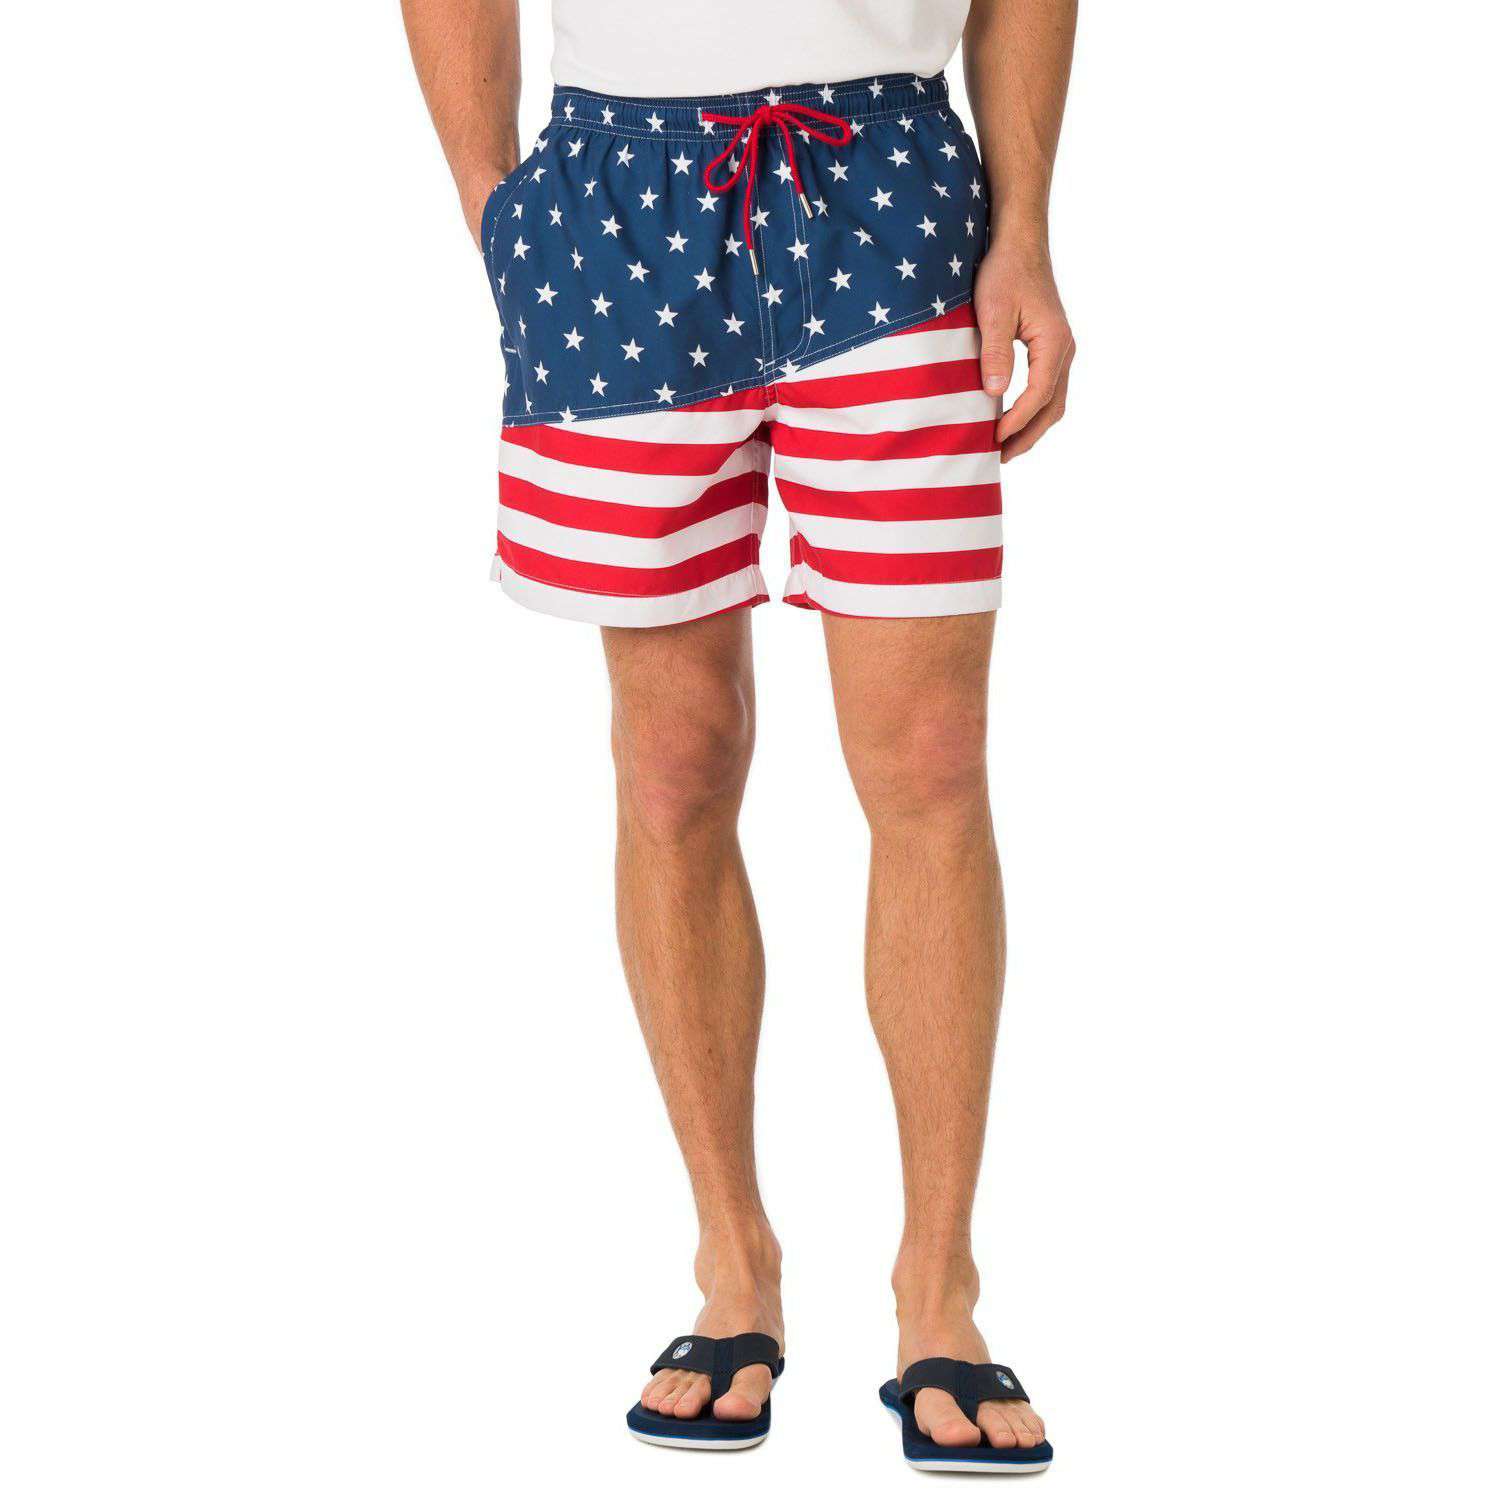 Two If By Sea Swim Trunk in Red, White and Blue by Southern Tide - Country Club Prep